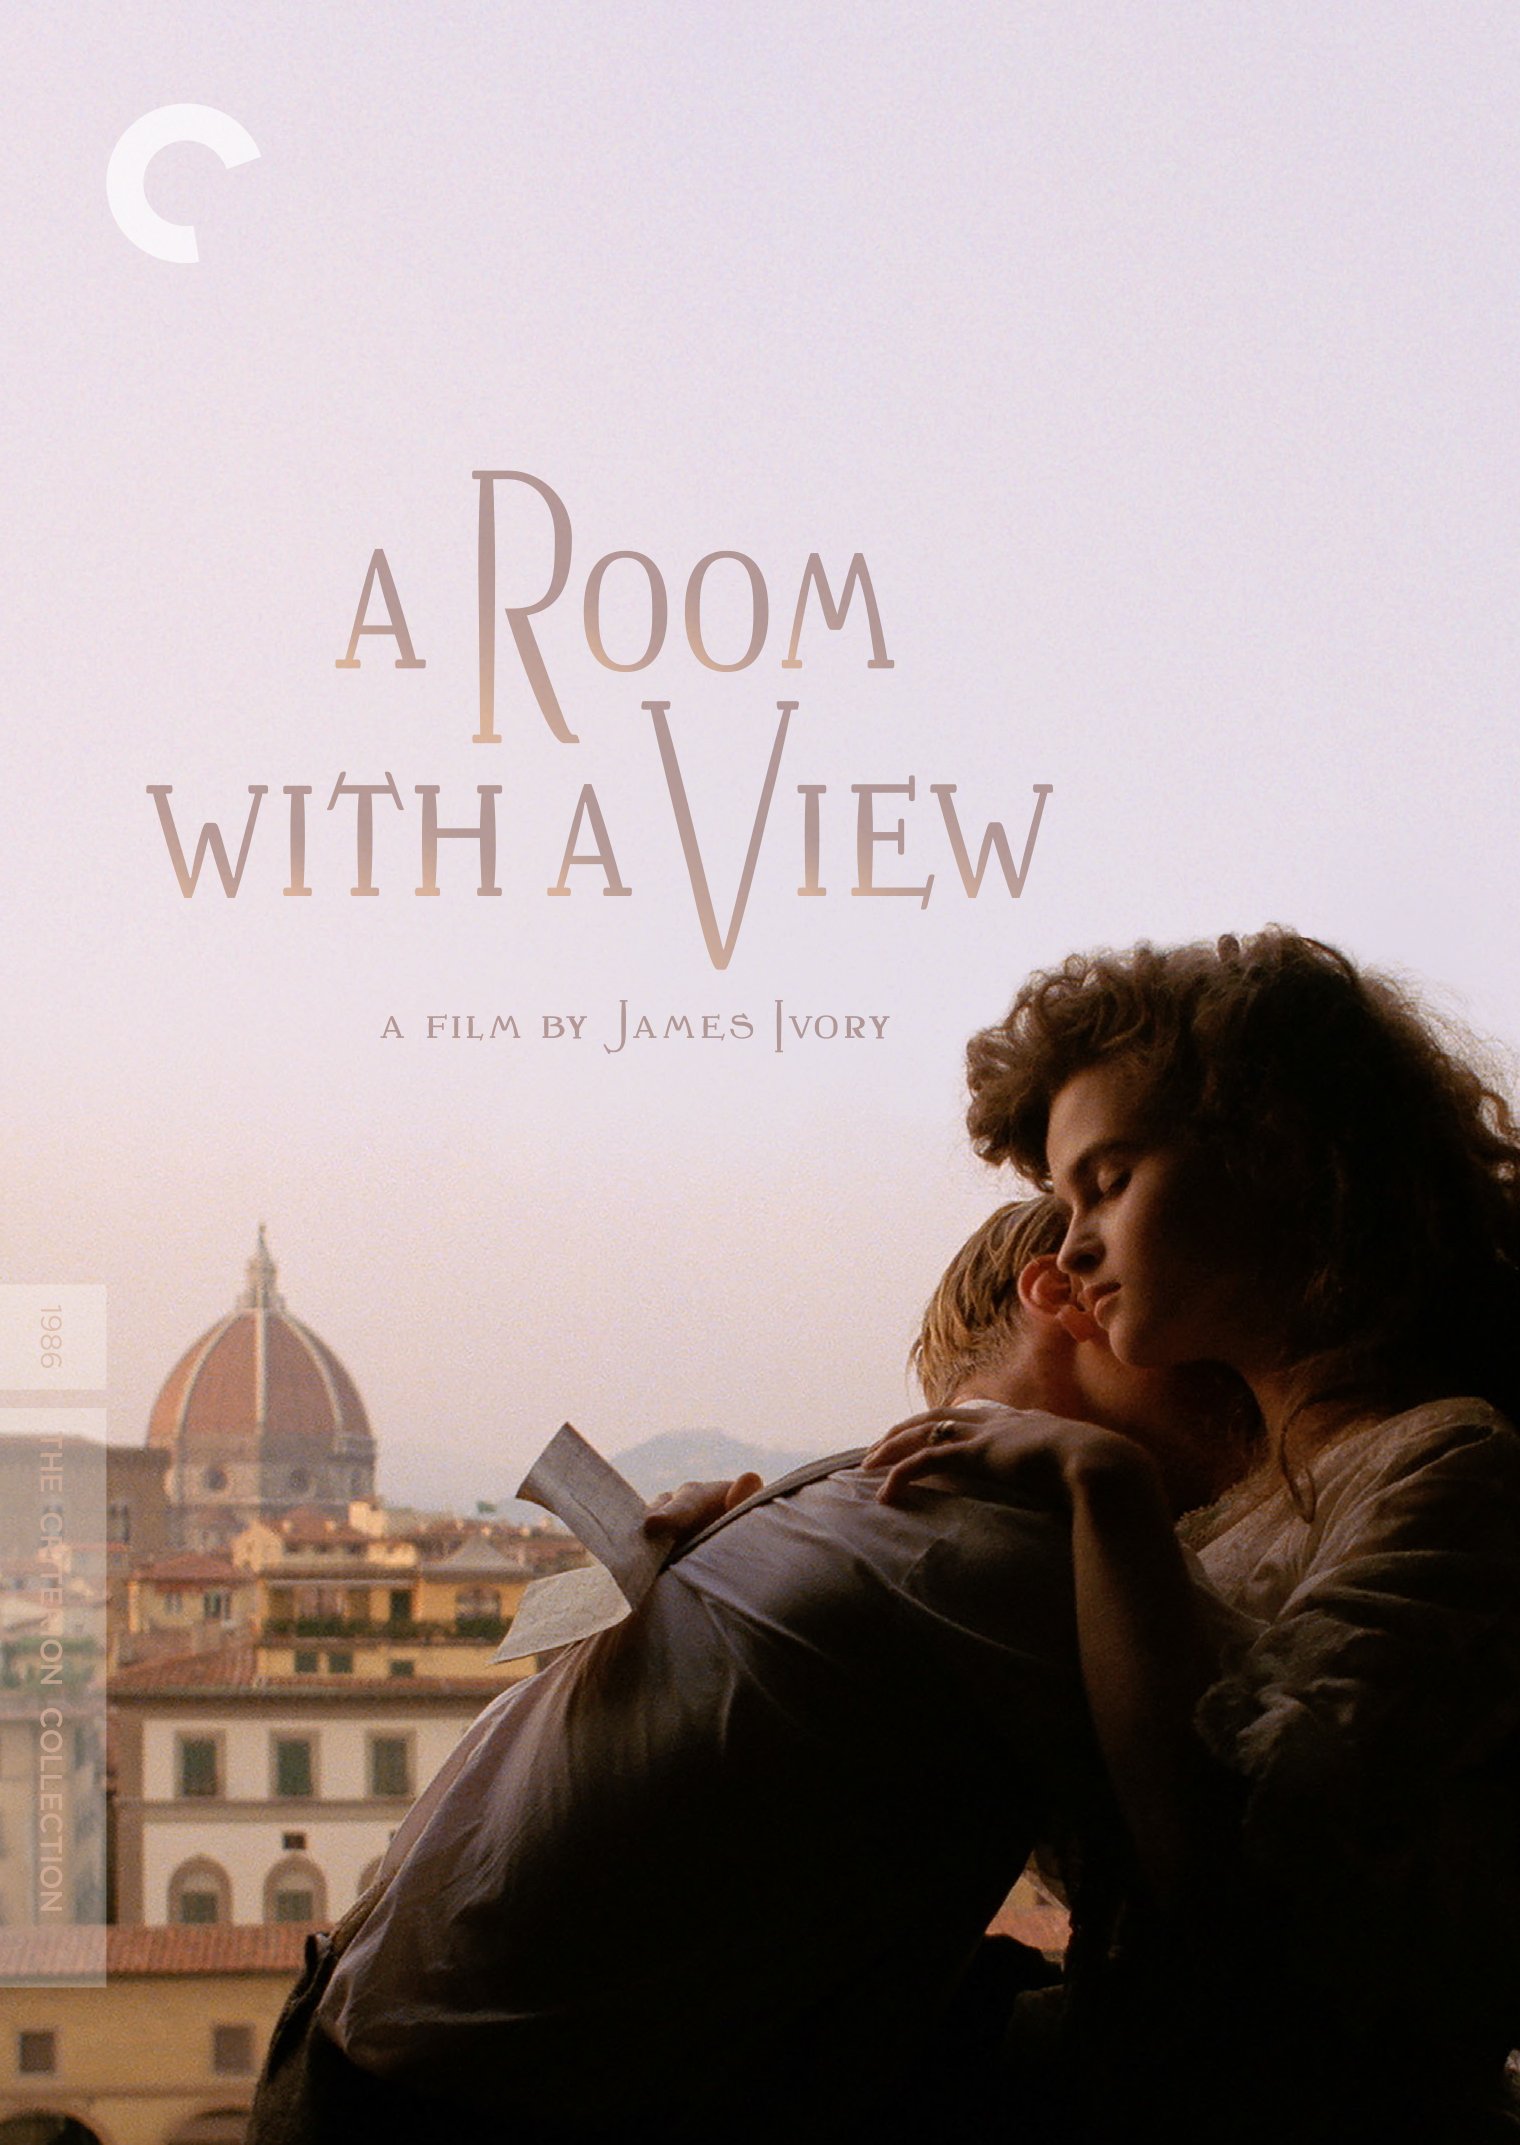 A Room With A View Book A Room with a View DVD Release Date